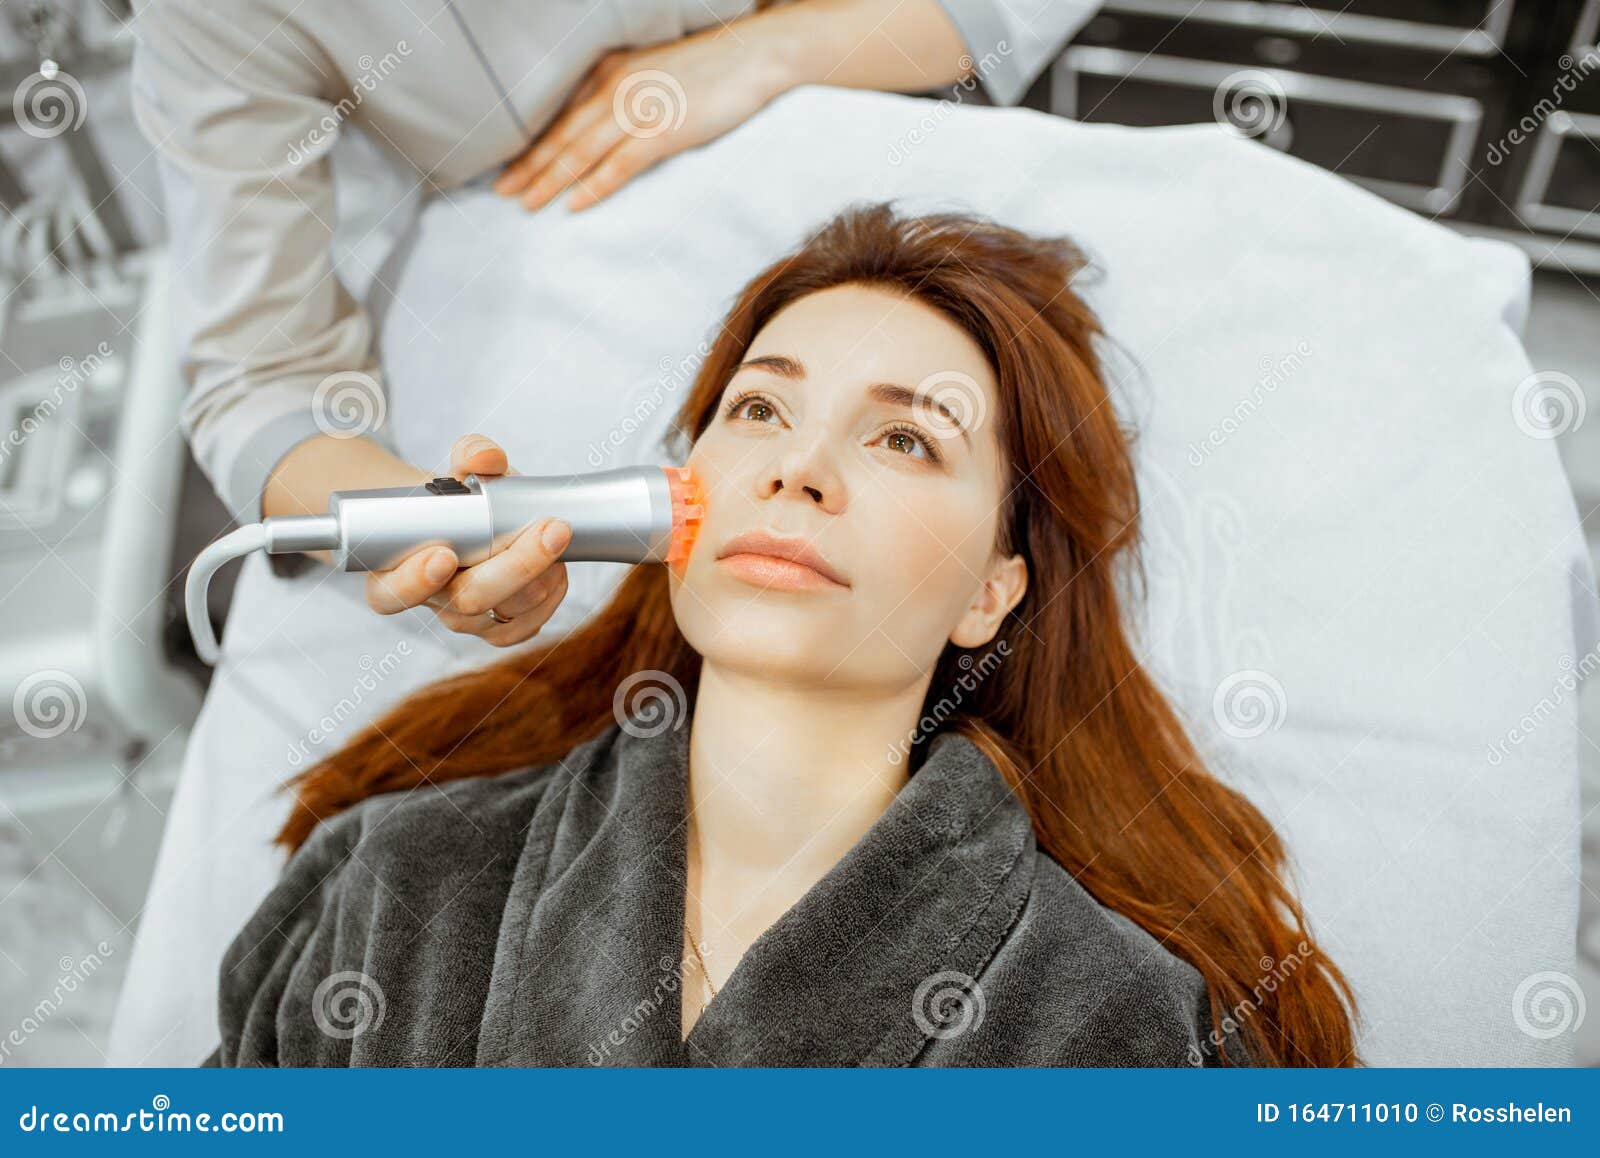 Cosmetologist Making Facial Treatment To A Woman Stock Photo Image Of